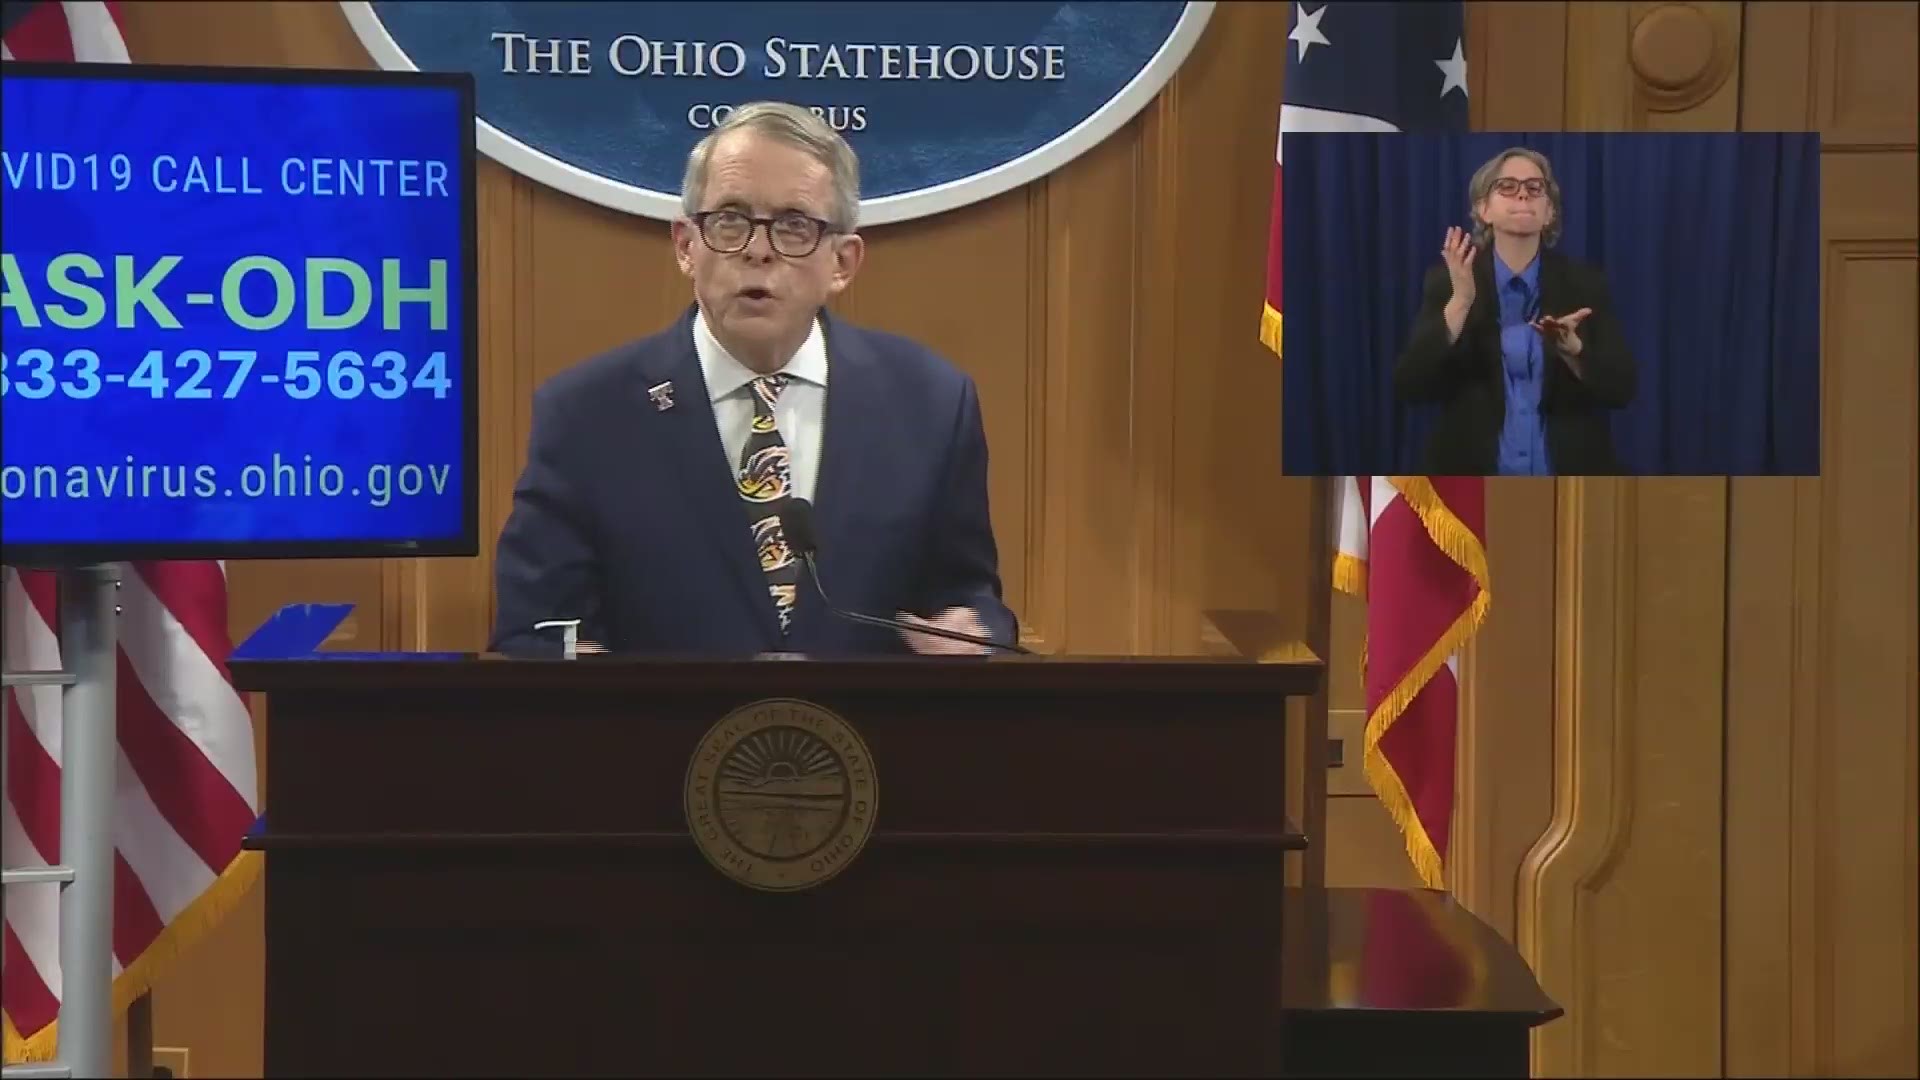 "We're trying to get Ohio back to work. And at the same time, we're trying to protect Ohioans," said Ohio Governor Mike DeWine.